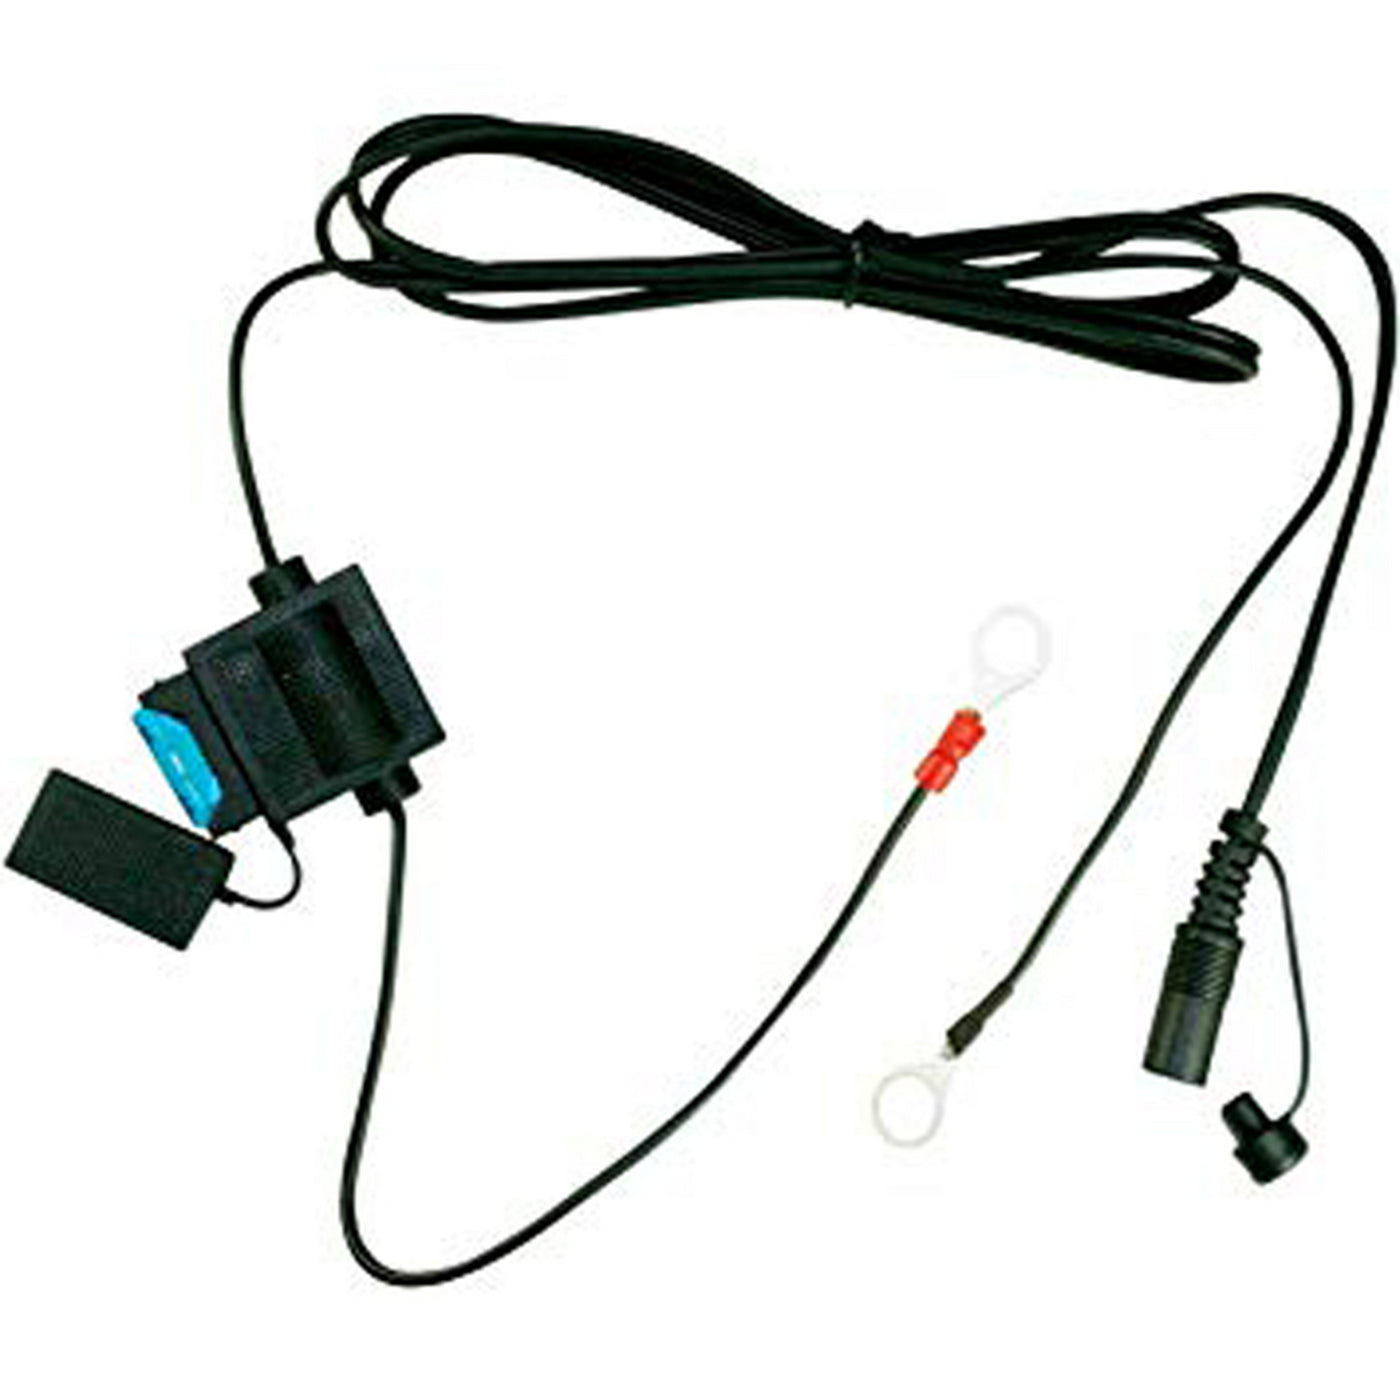 ACC. KIT WITH COAX FEMALE CABLE & ACCUMATE CONNECTOR#mpn_210122